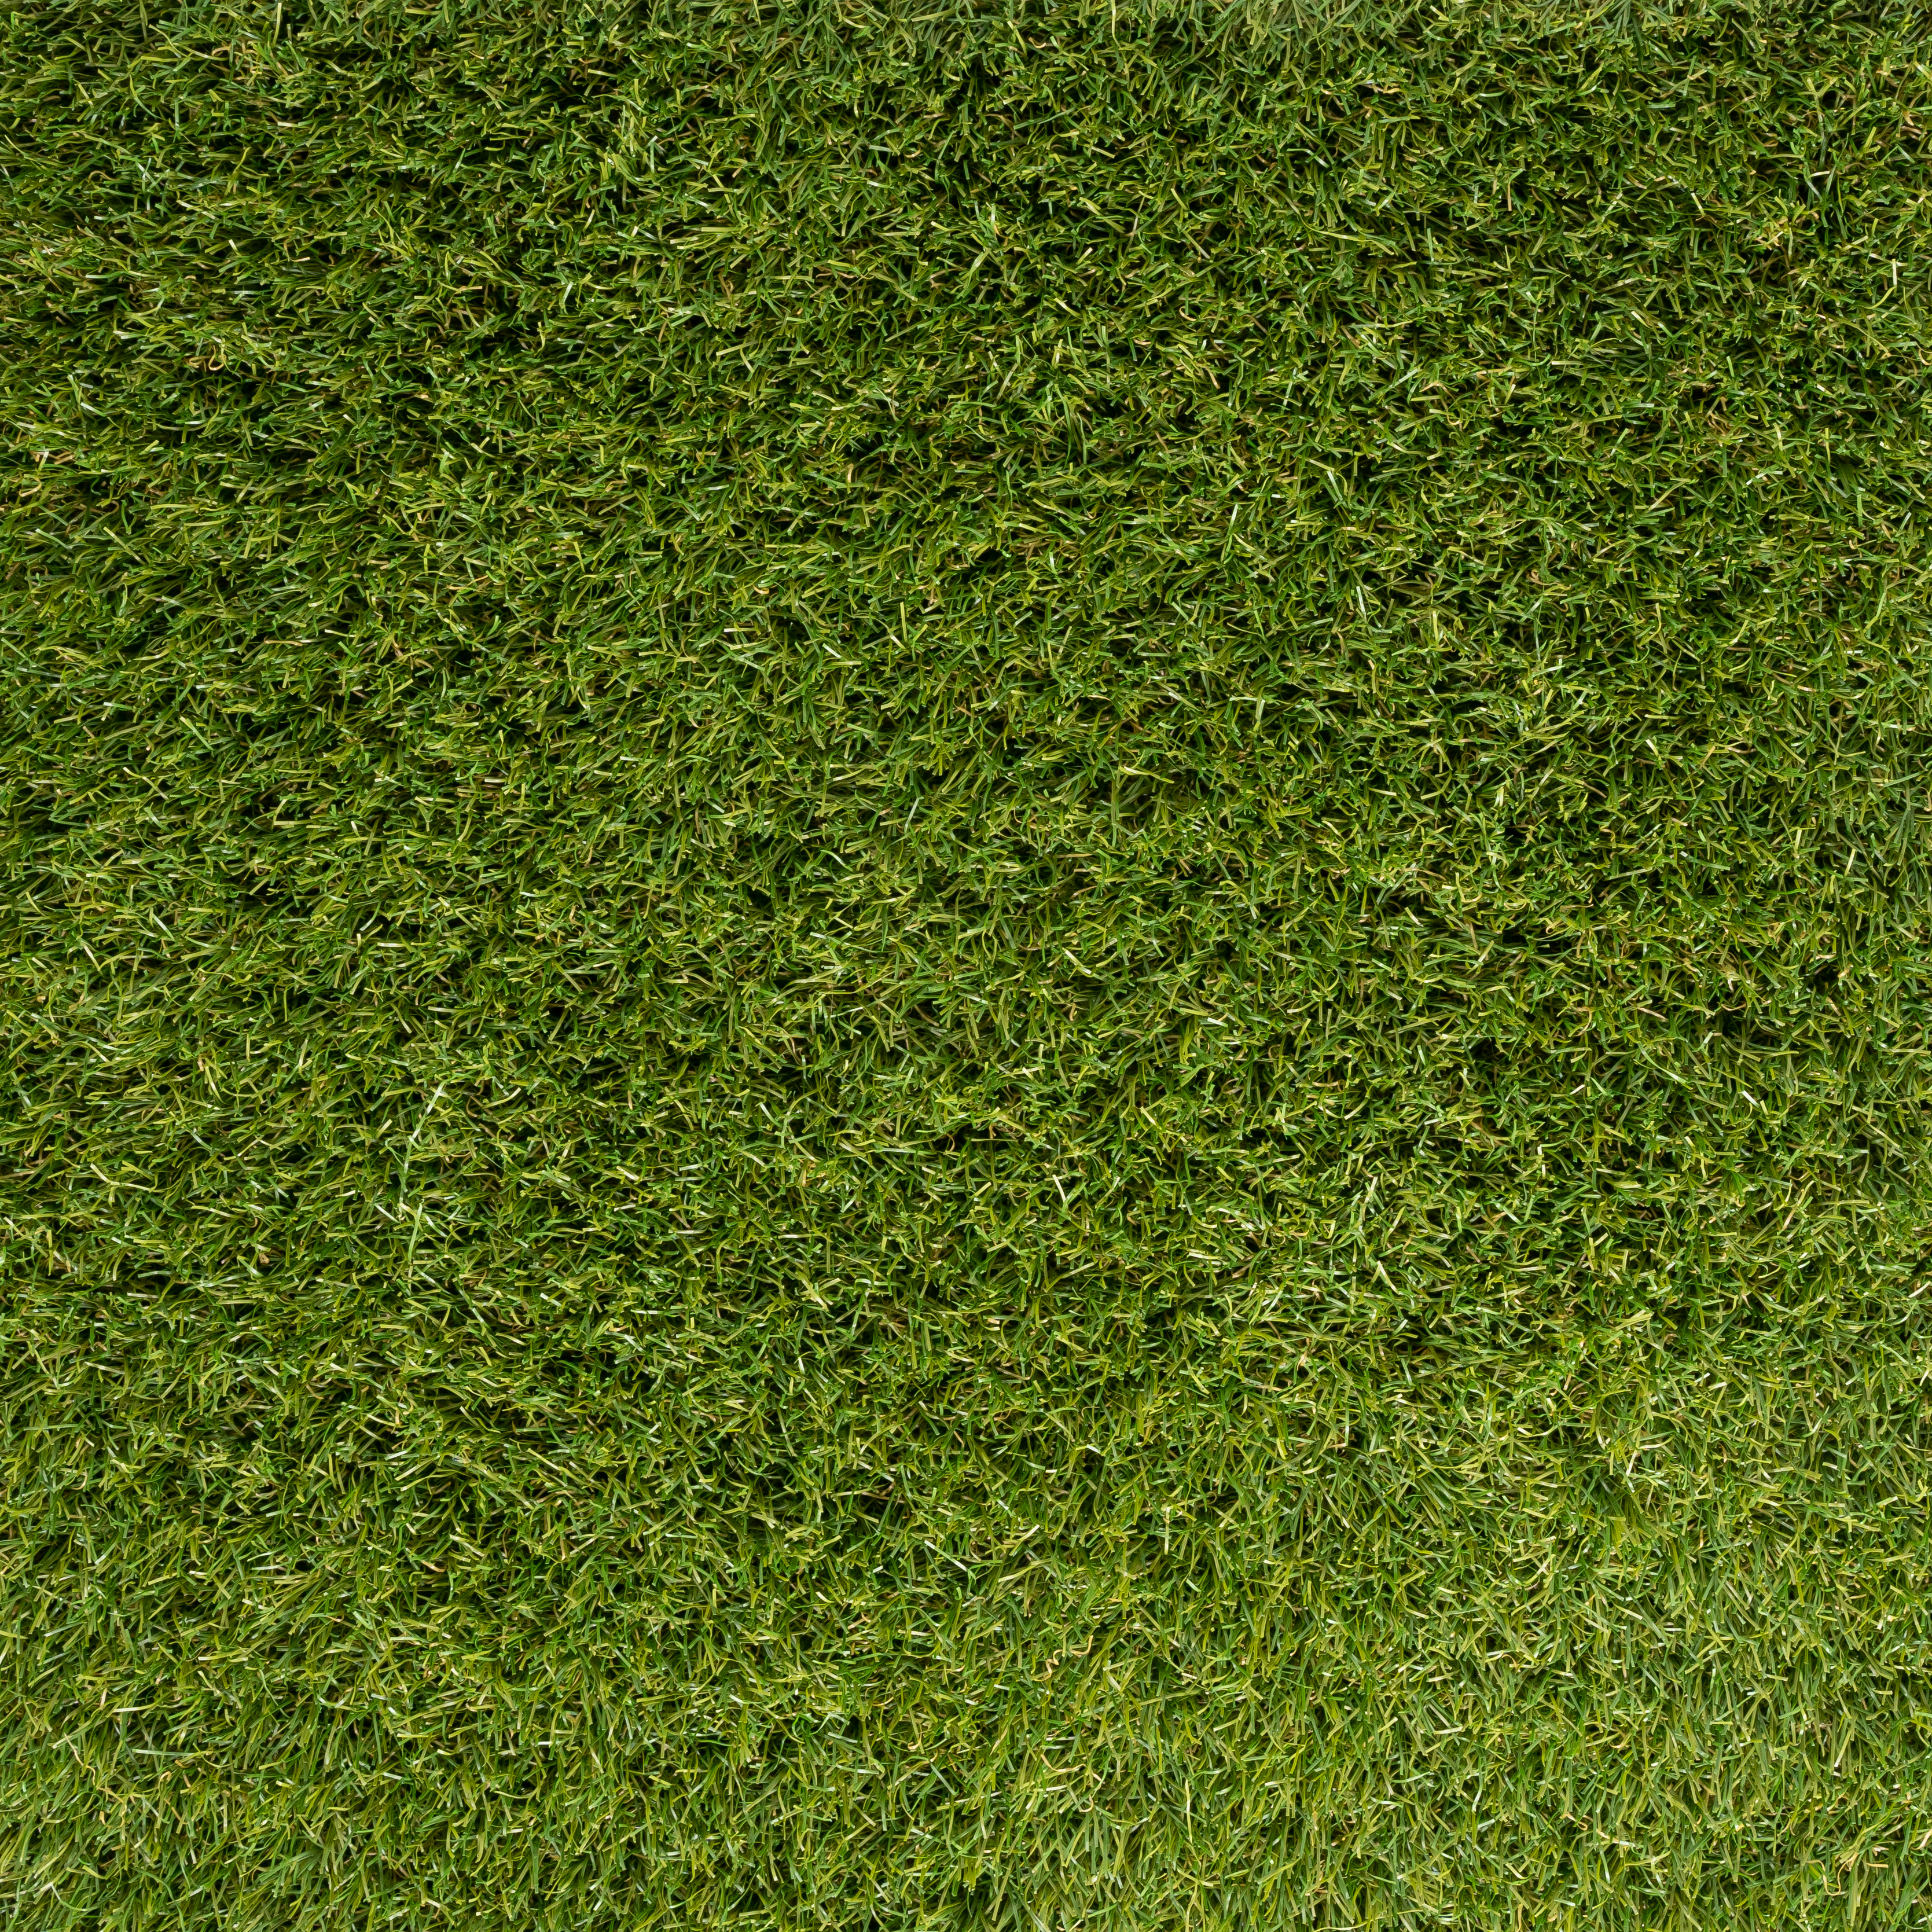  What Is The Price Of Artificial Grass Per M2?  thumbnail